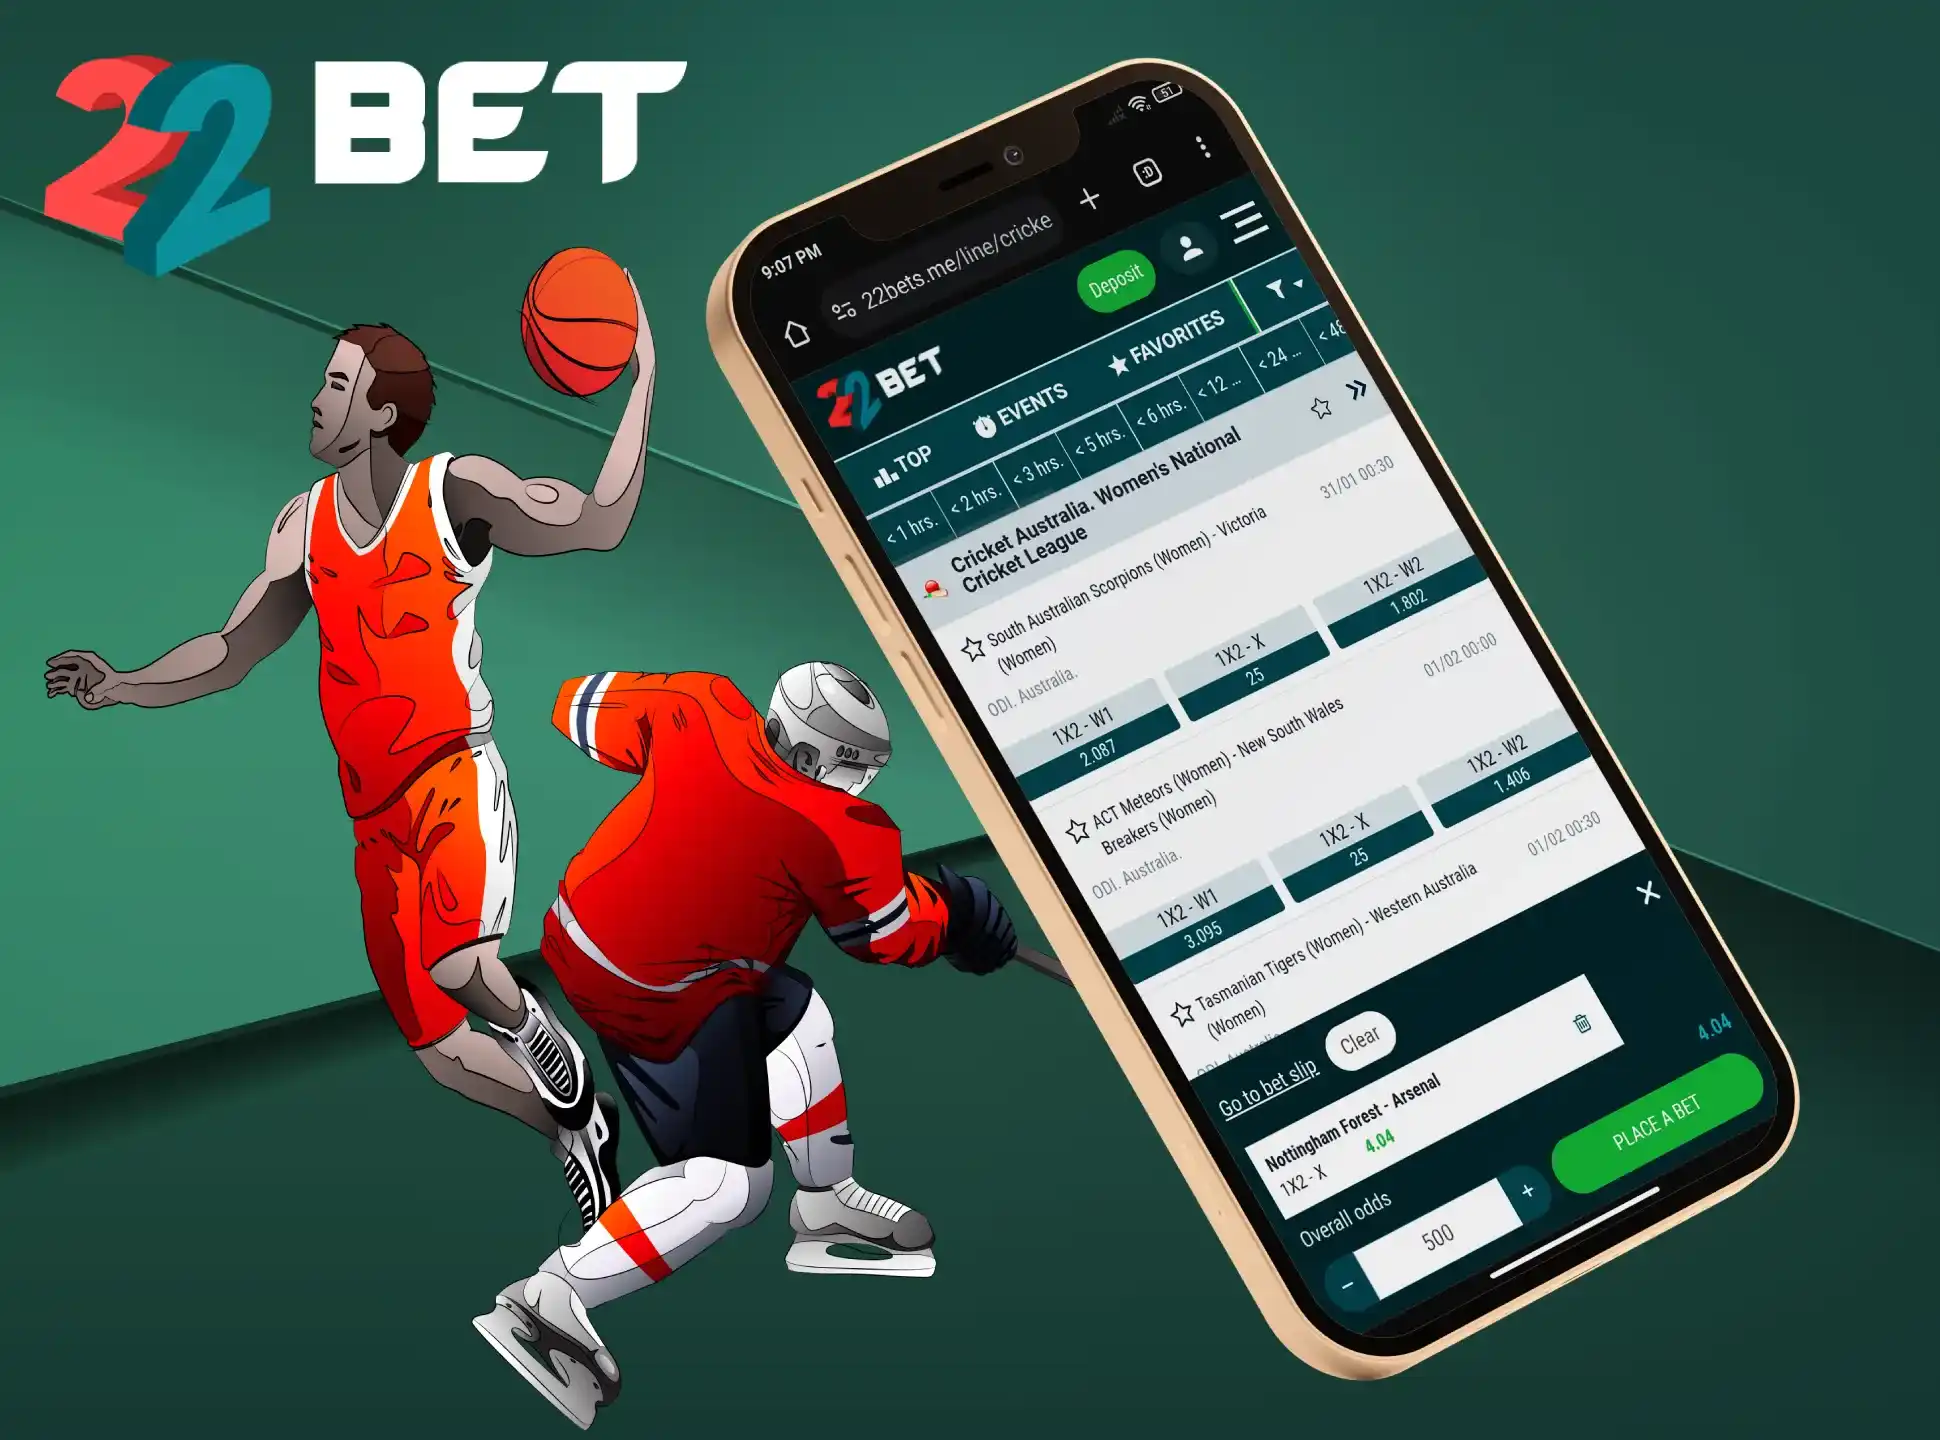 There are several betting options on the 22Bet app.